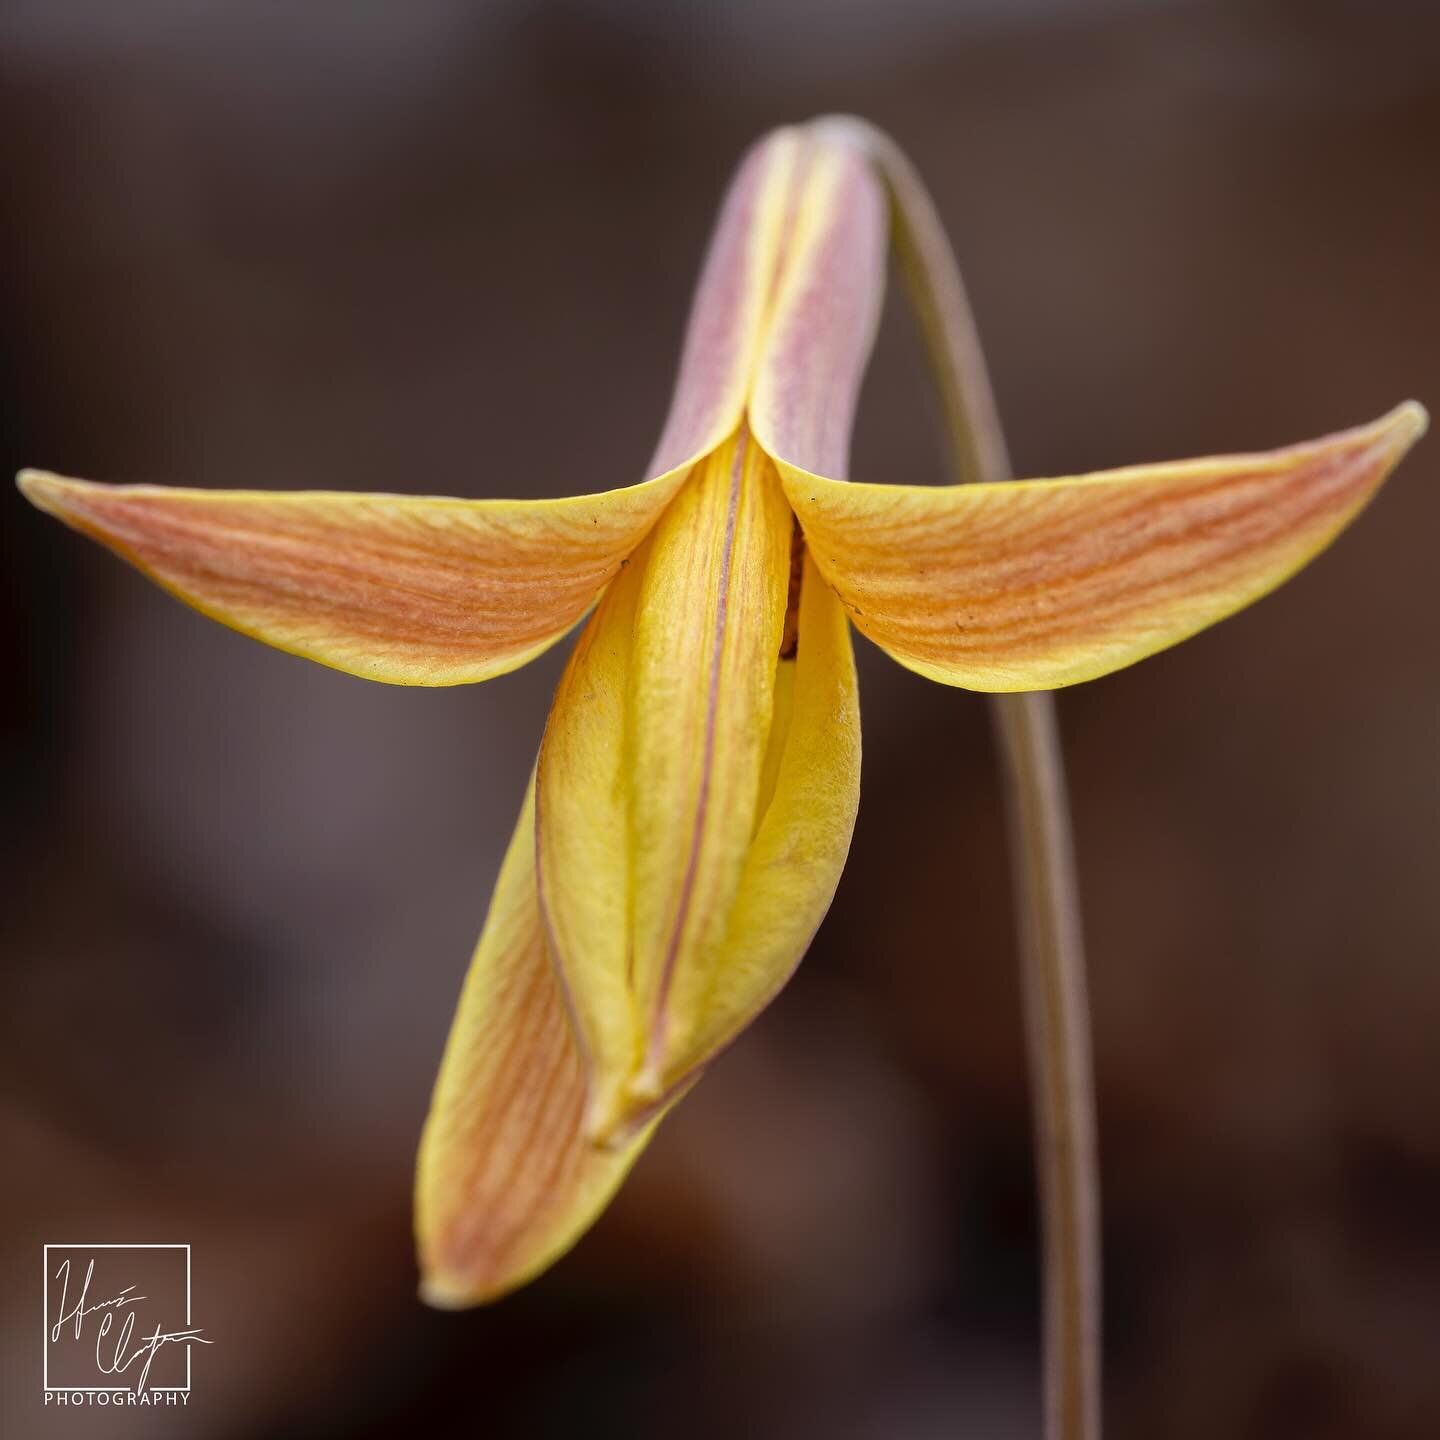 Trout lilies! 

I kept meaning to post these photos closer to when the trout lilies were still blooming, but that obviously didn&rsquo;t happen. Comment below if you made it out to see the lilies this year!

Trout lilies get their name from the patte